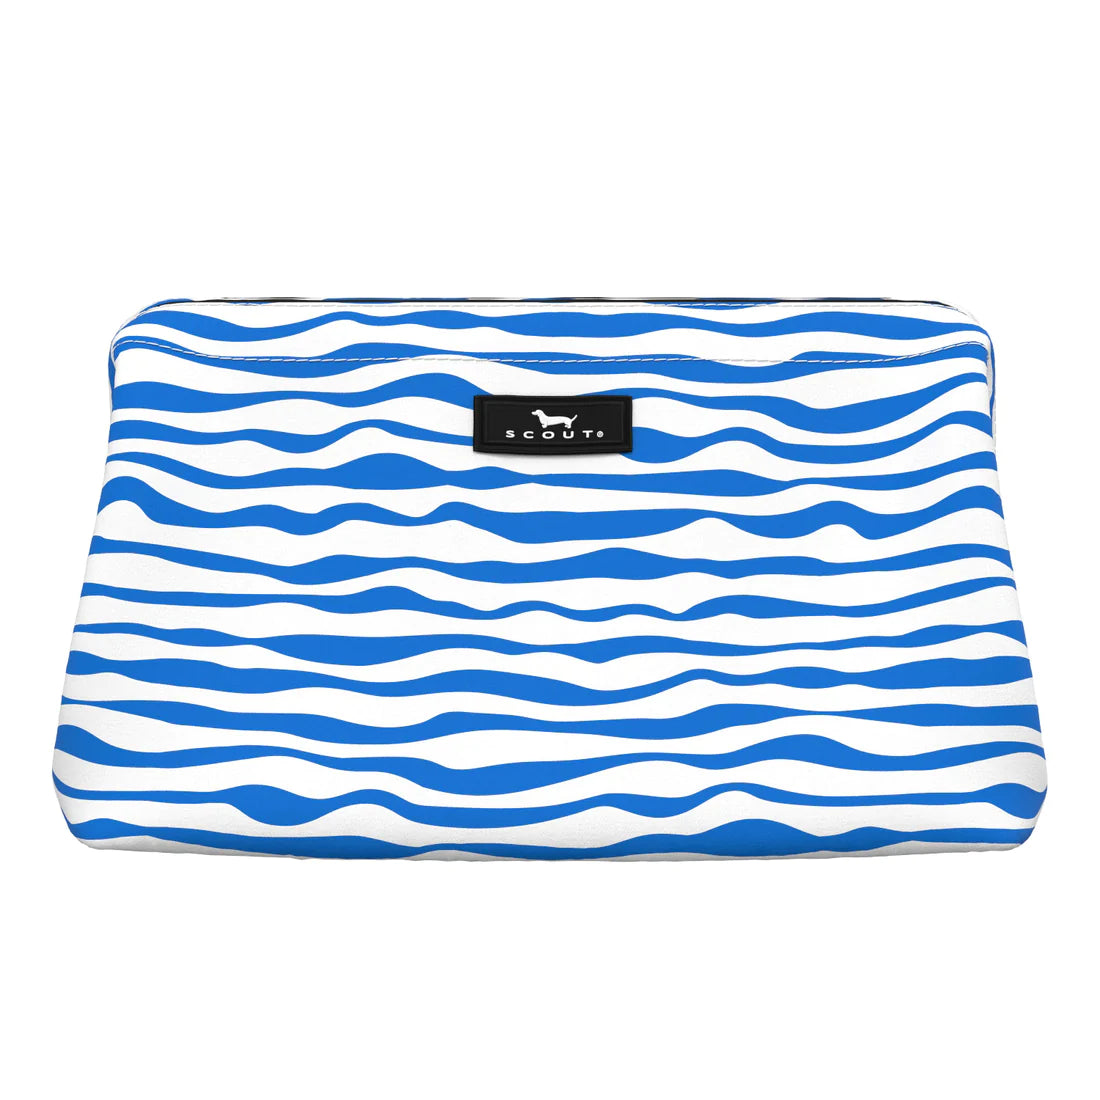 Scout Big Mouth Toiletry Bag - Vitamin Sea